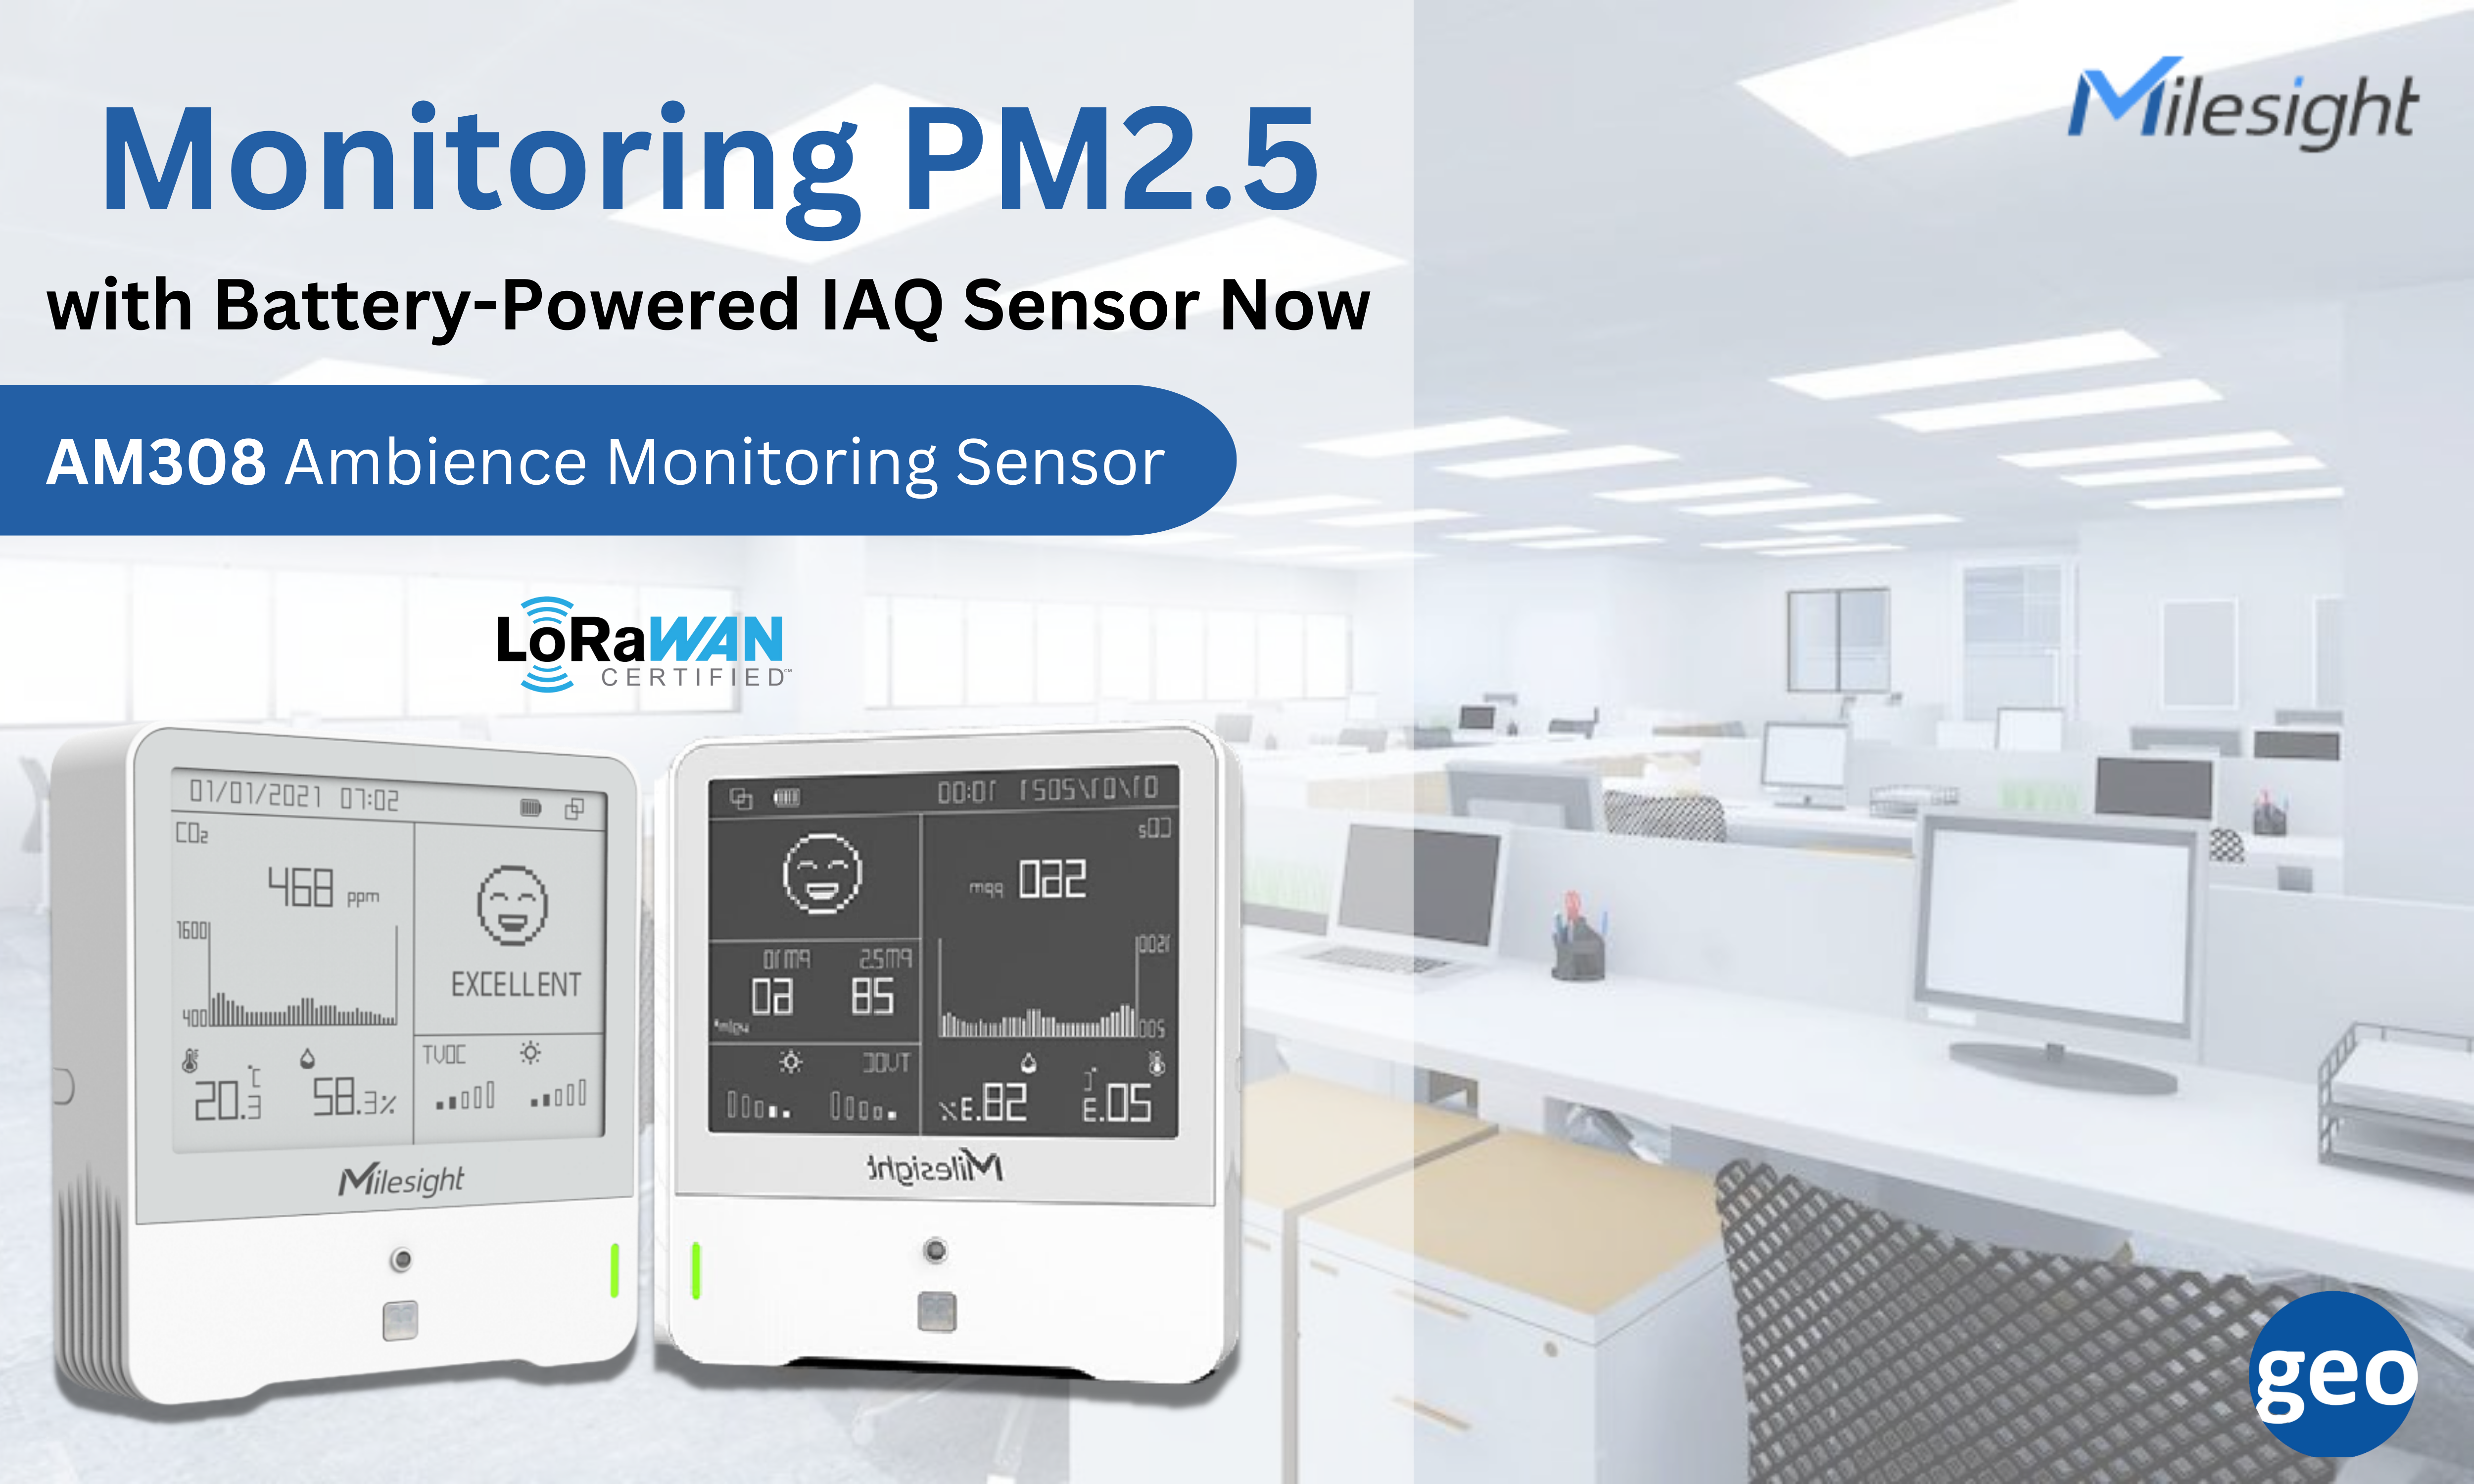 Milesight IoT: Monitoring PM2.5 with Battery-Powered IAQ Sensor Now for Indoor Air Quality of the Office, Stores, Classrooms, Hospitals, etc.